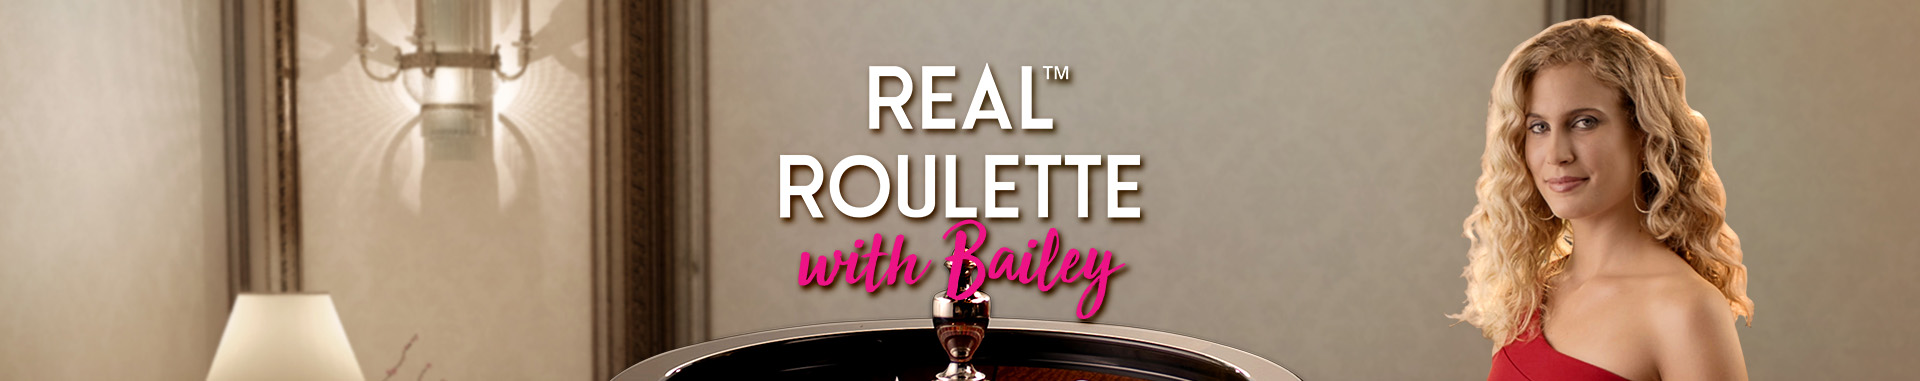 Real Roulette with Bailey